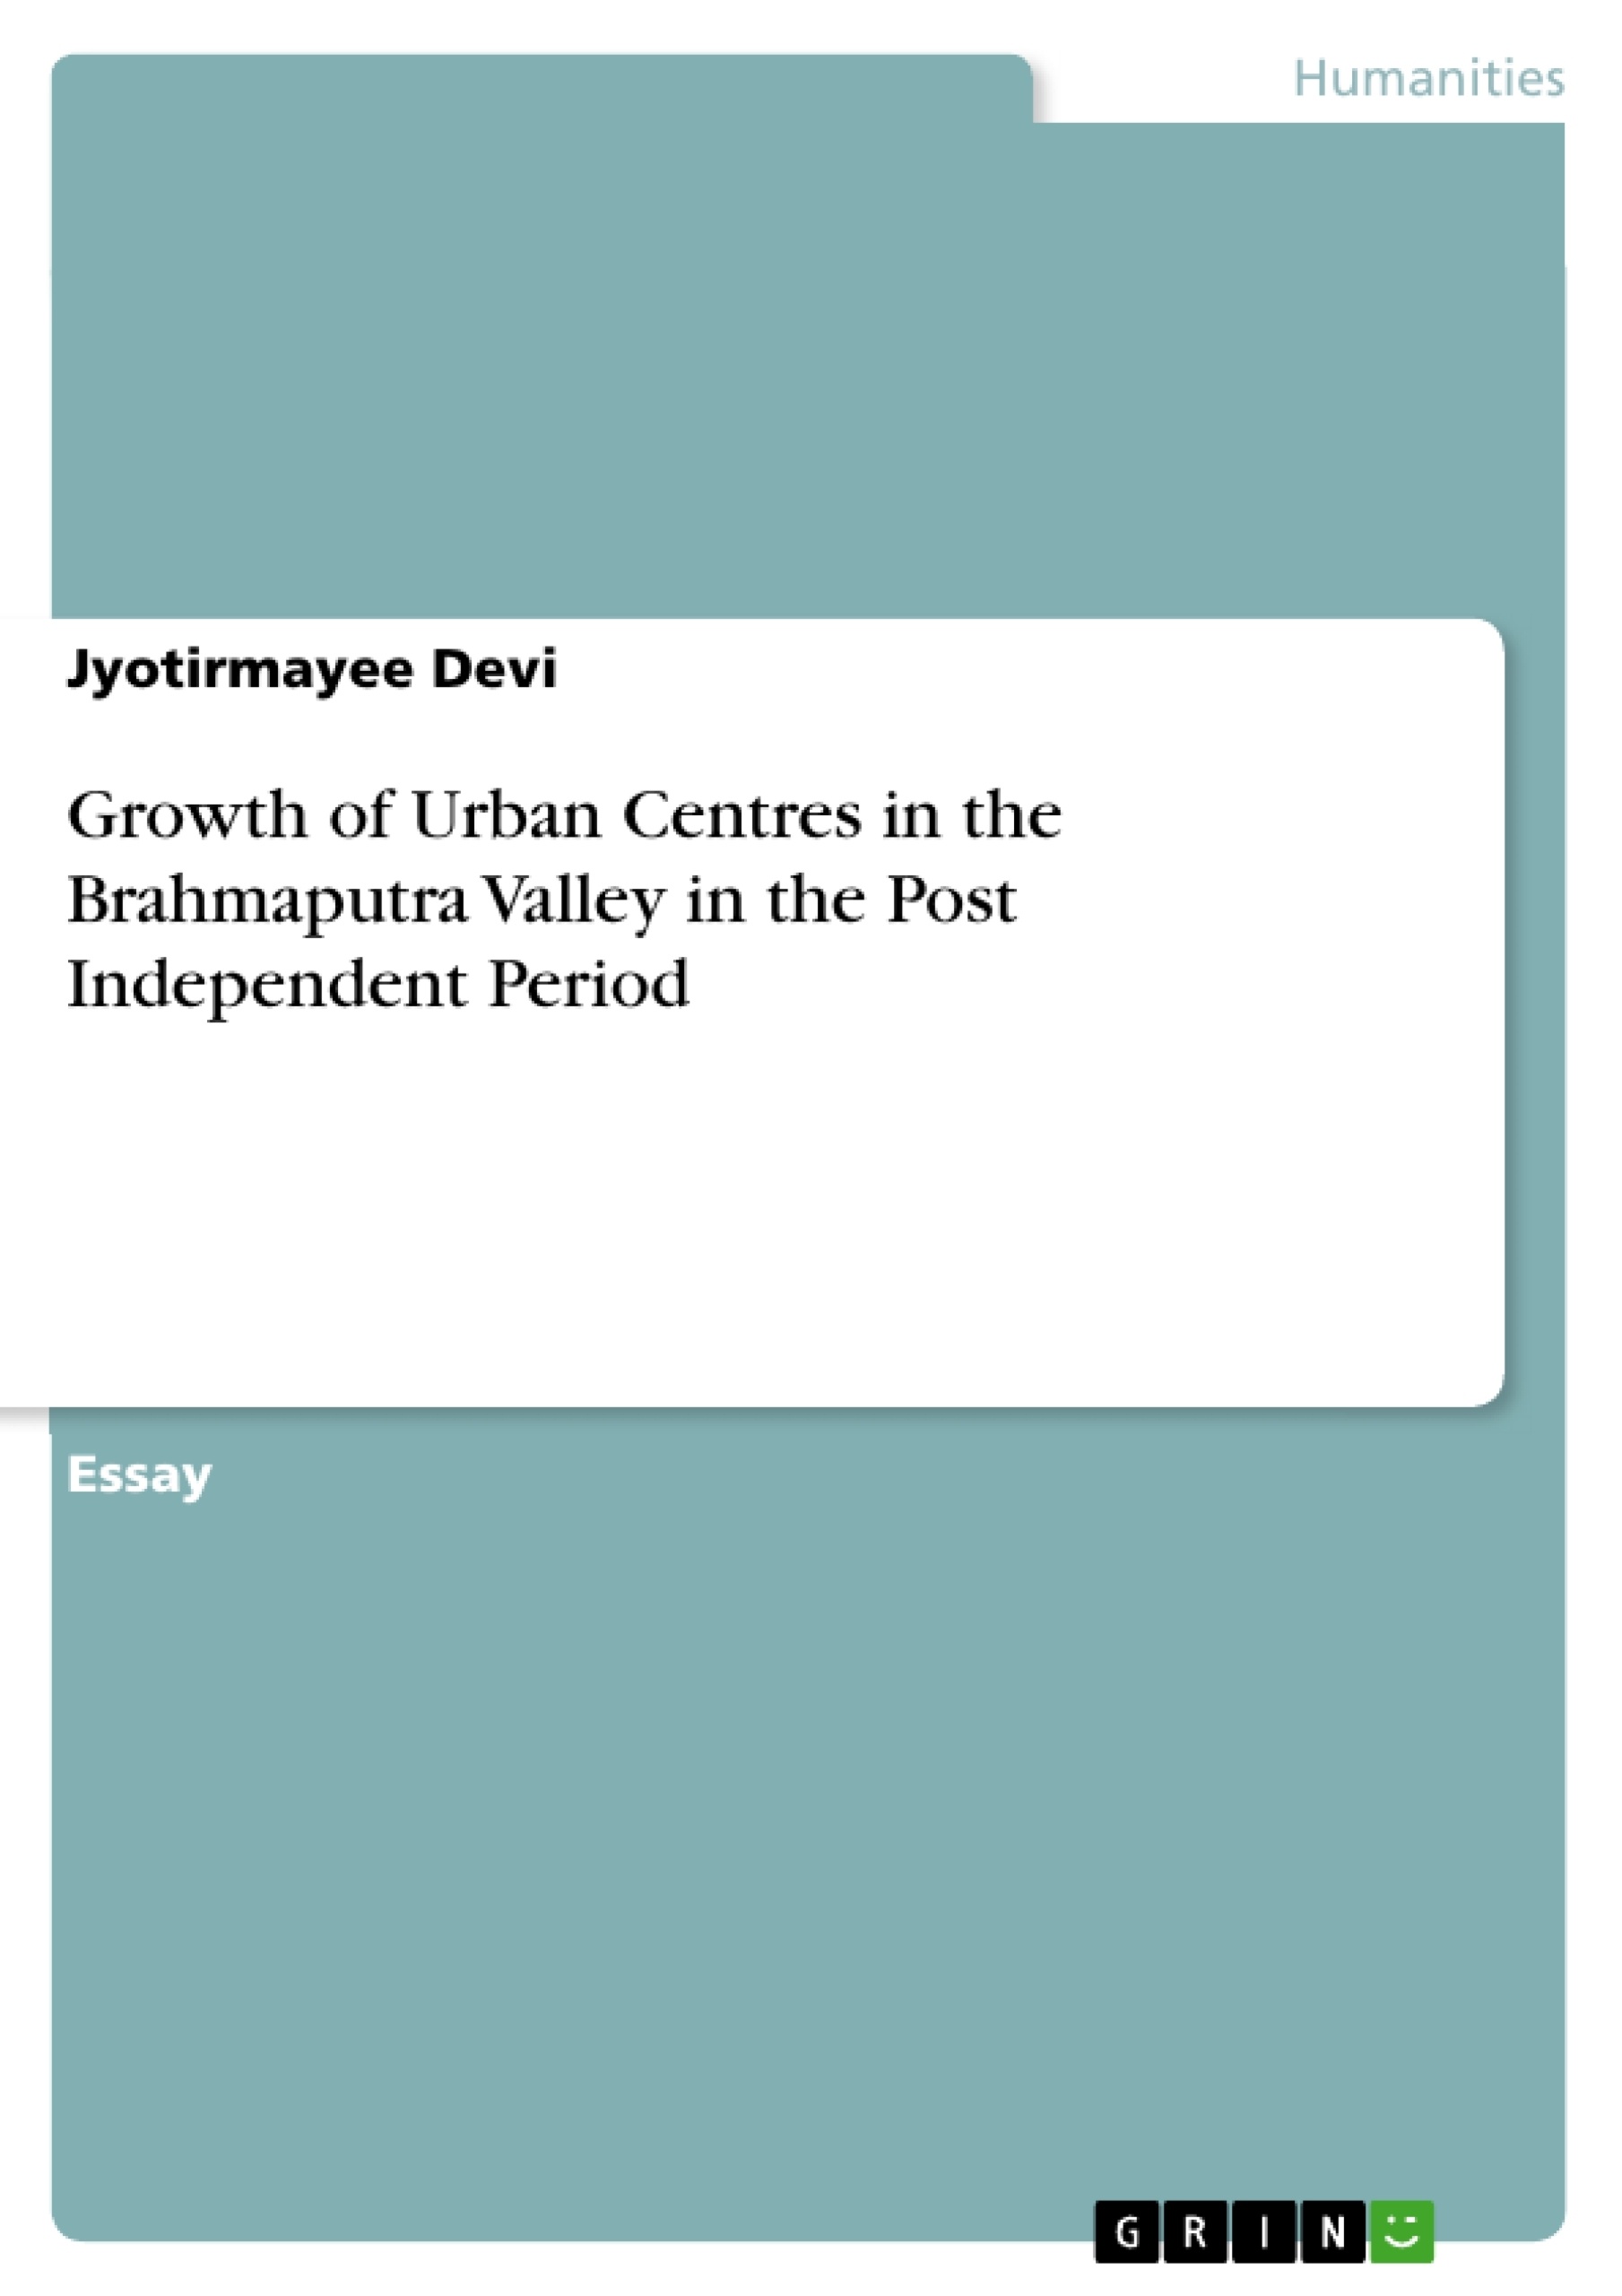 Titre: Growth of Urban Centres in the Brahmaputra Valley in the Post Independent Period